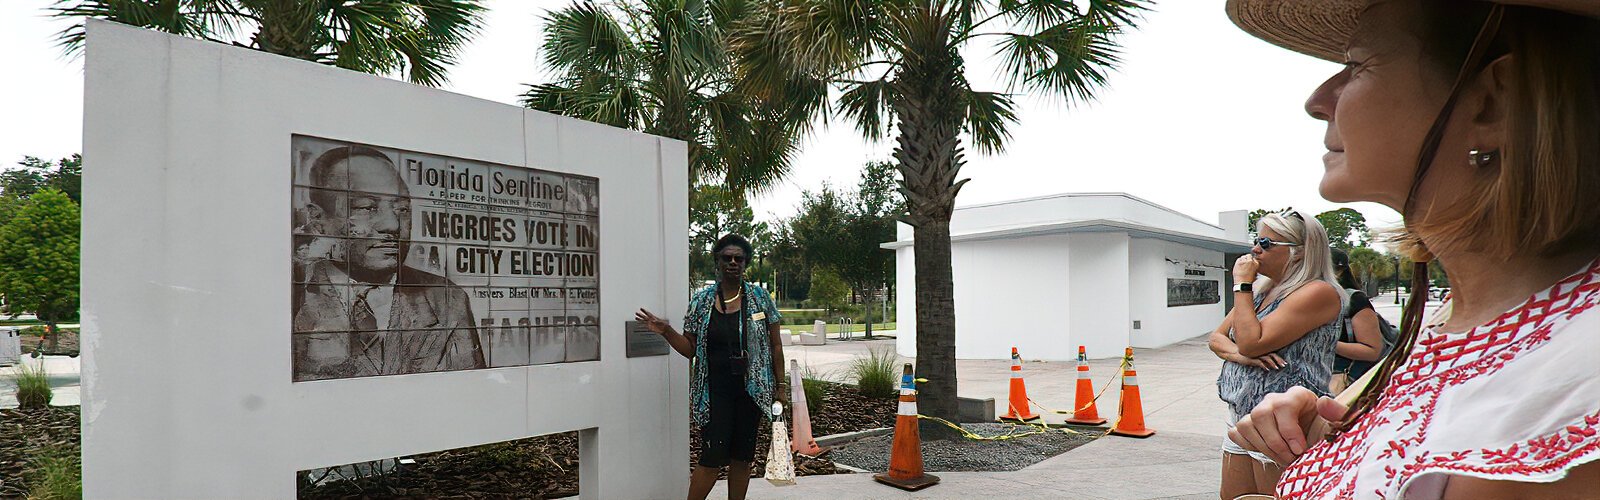 The whole history of the African American community is depicted through Rufus Butler Seder’s LIFETILES within Perry Harvey, Sr. Park for the enjoyment and education of the visitors.